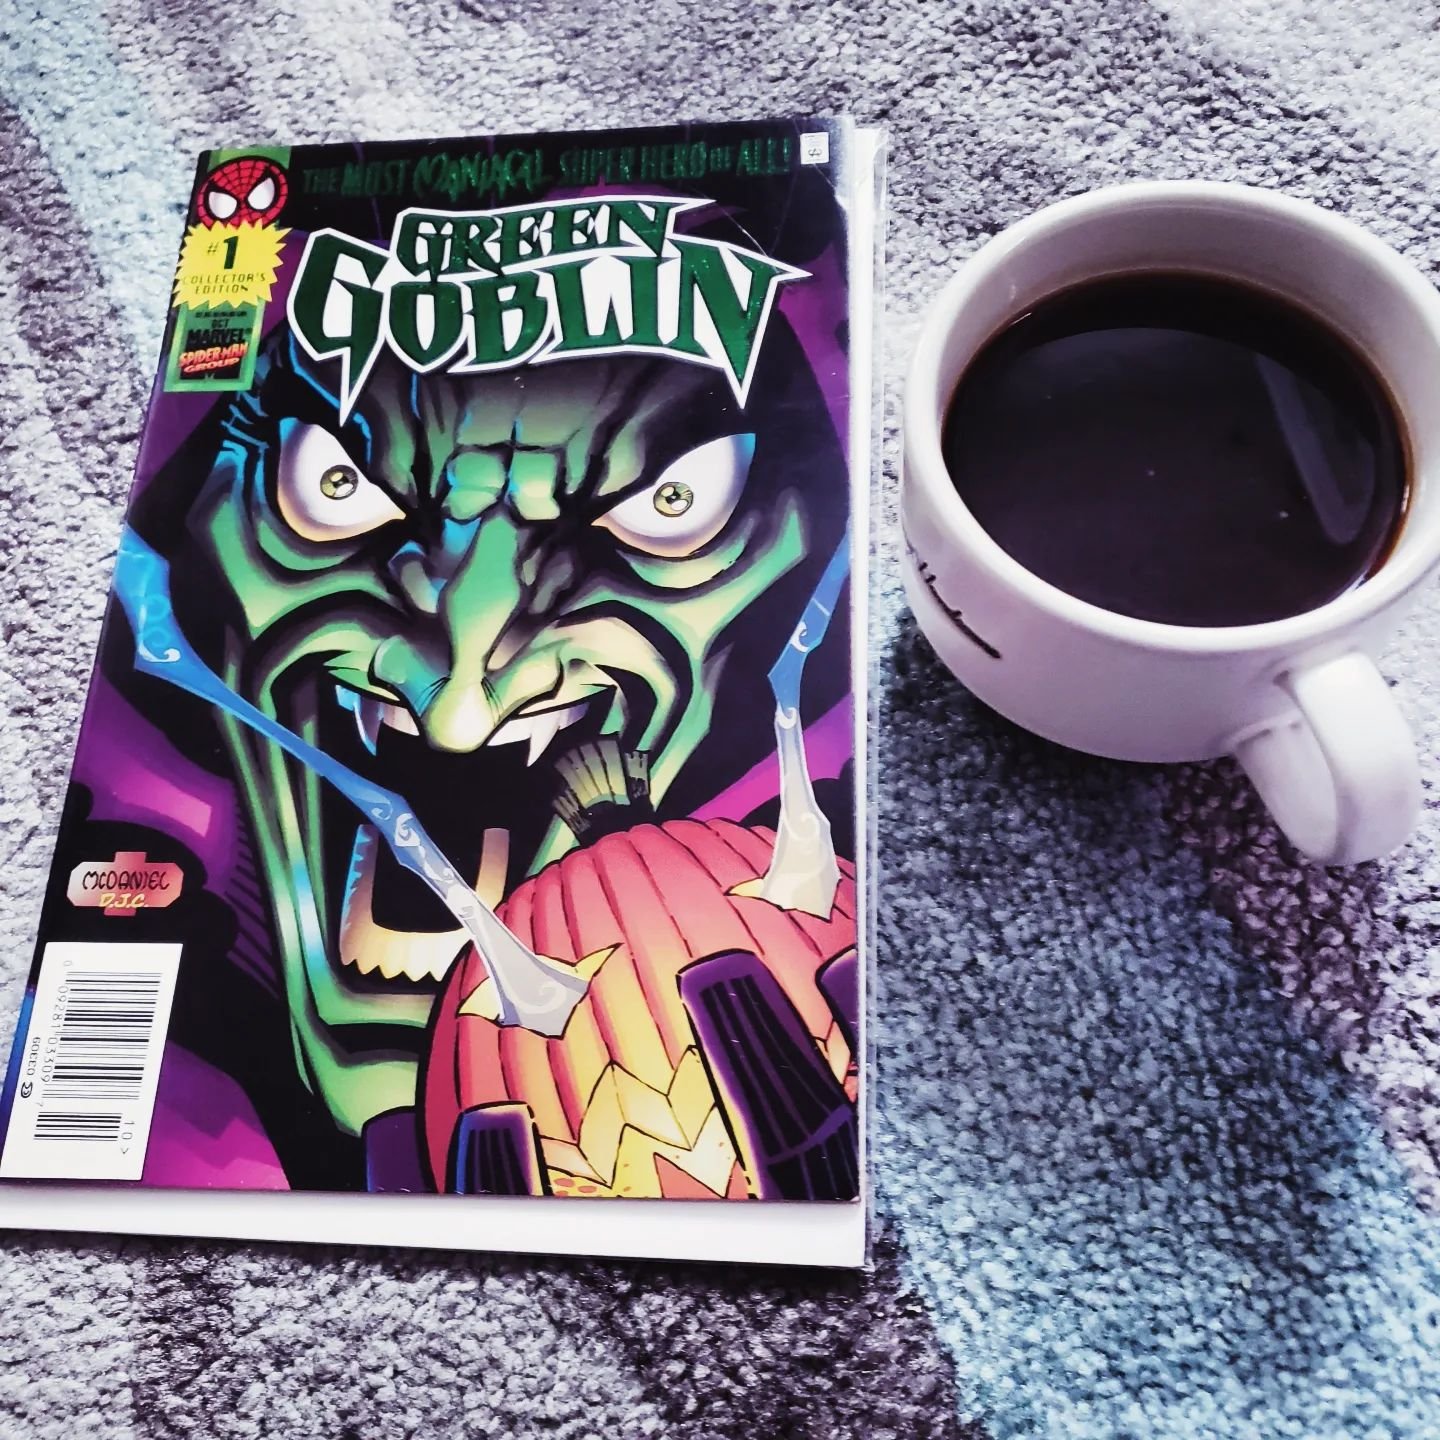 Today's coffee ☕ and a comic 📓 is Green Goblin #1 from 1995
In the shadows of New York City, a new legacy takes flight as the Green Goblin returns in a thrilling saga that will leave readers breathless. This introduces us to a new era of chaos and i